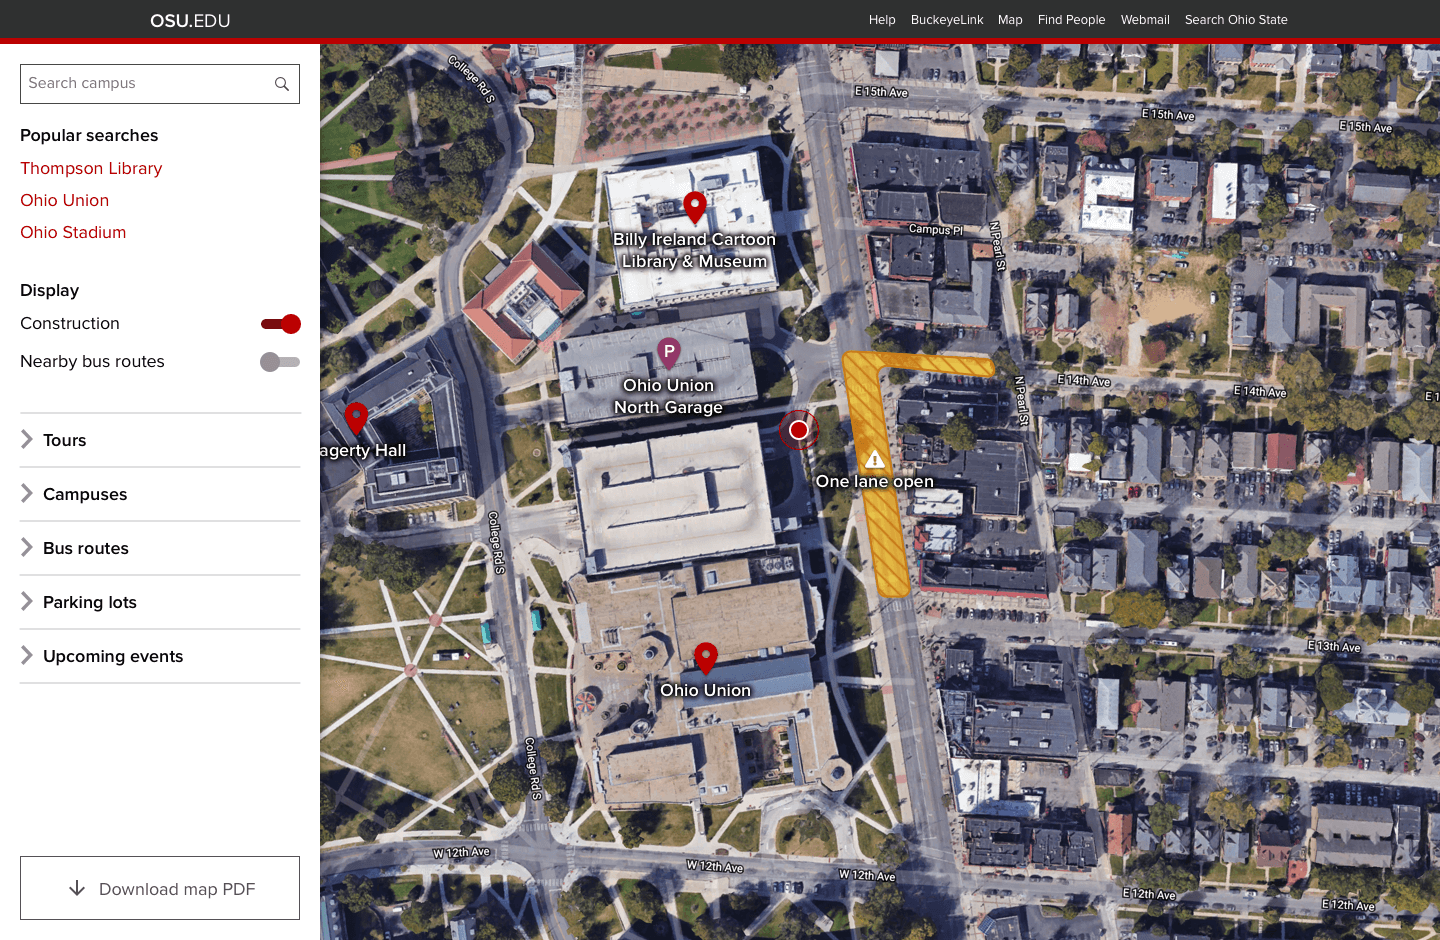 Screenshot mockup of proposed changes to campus map